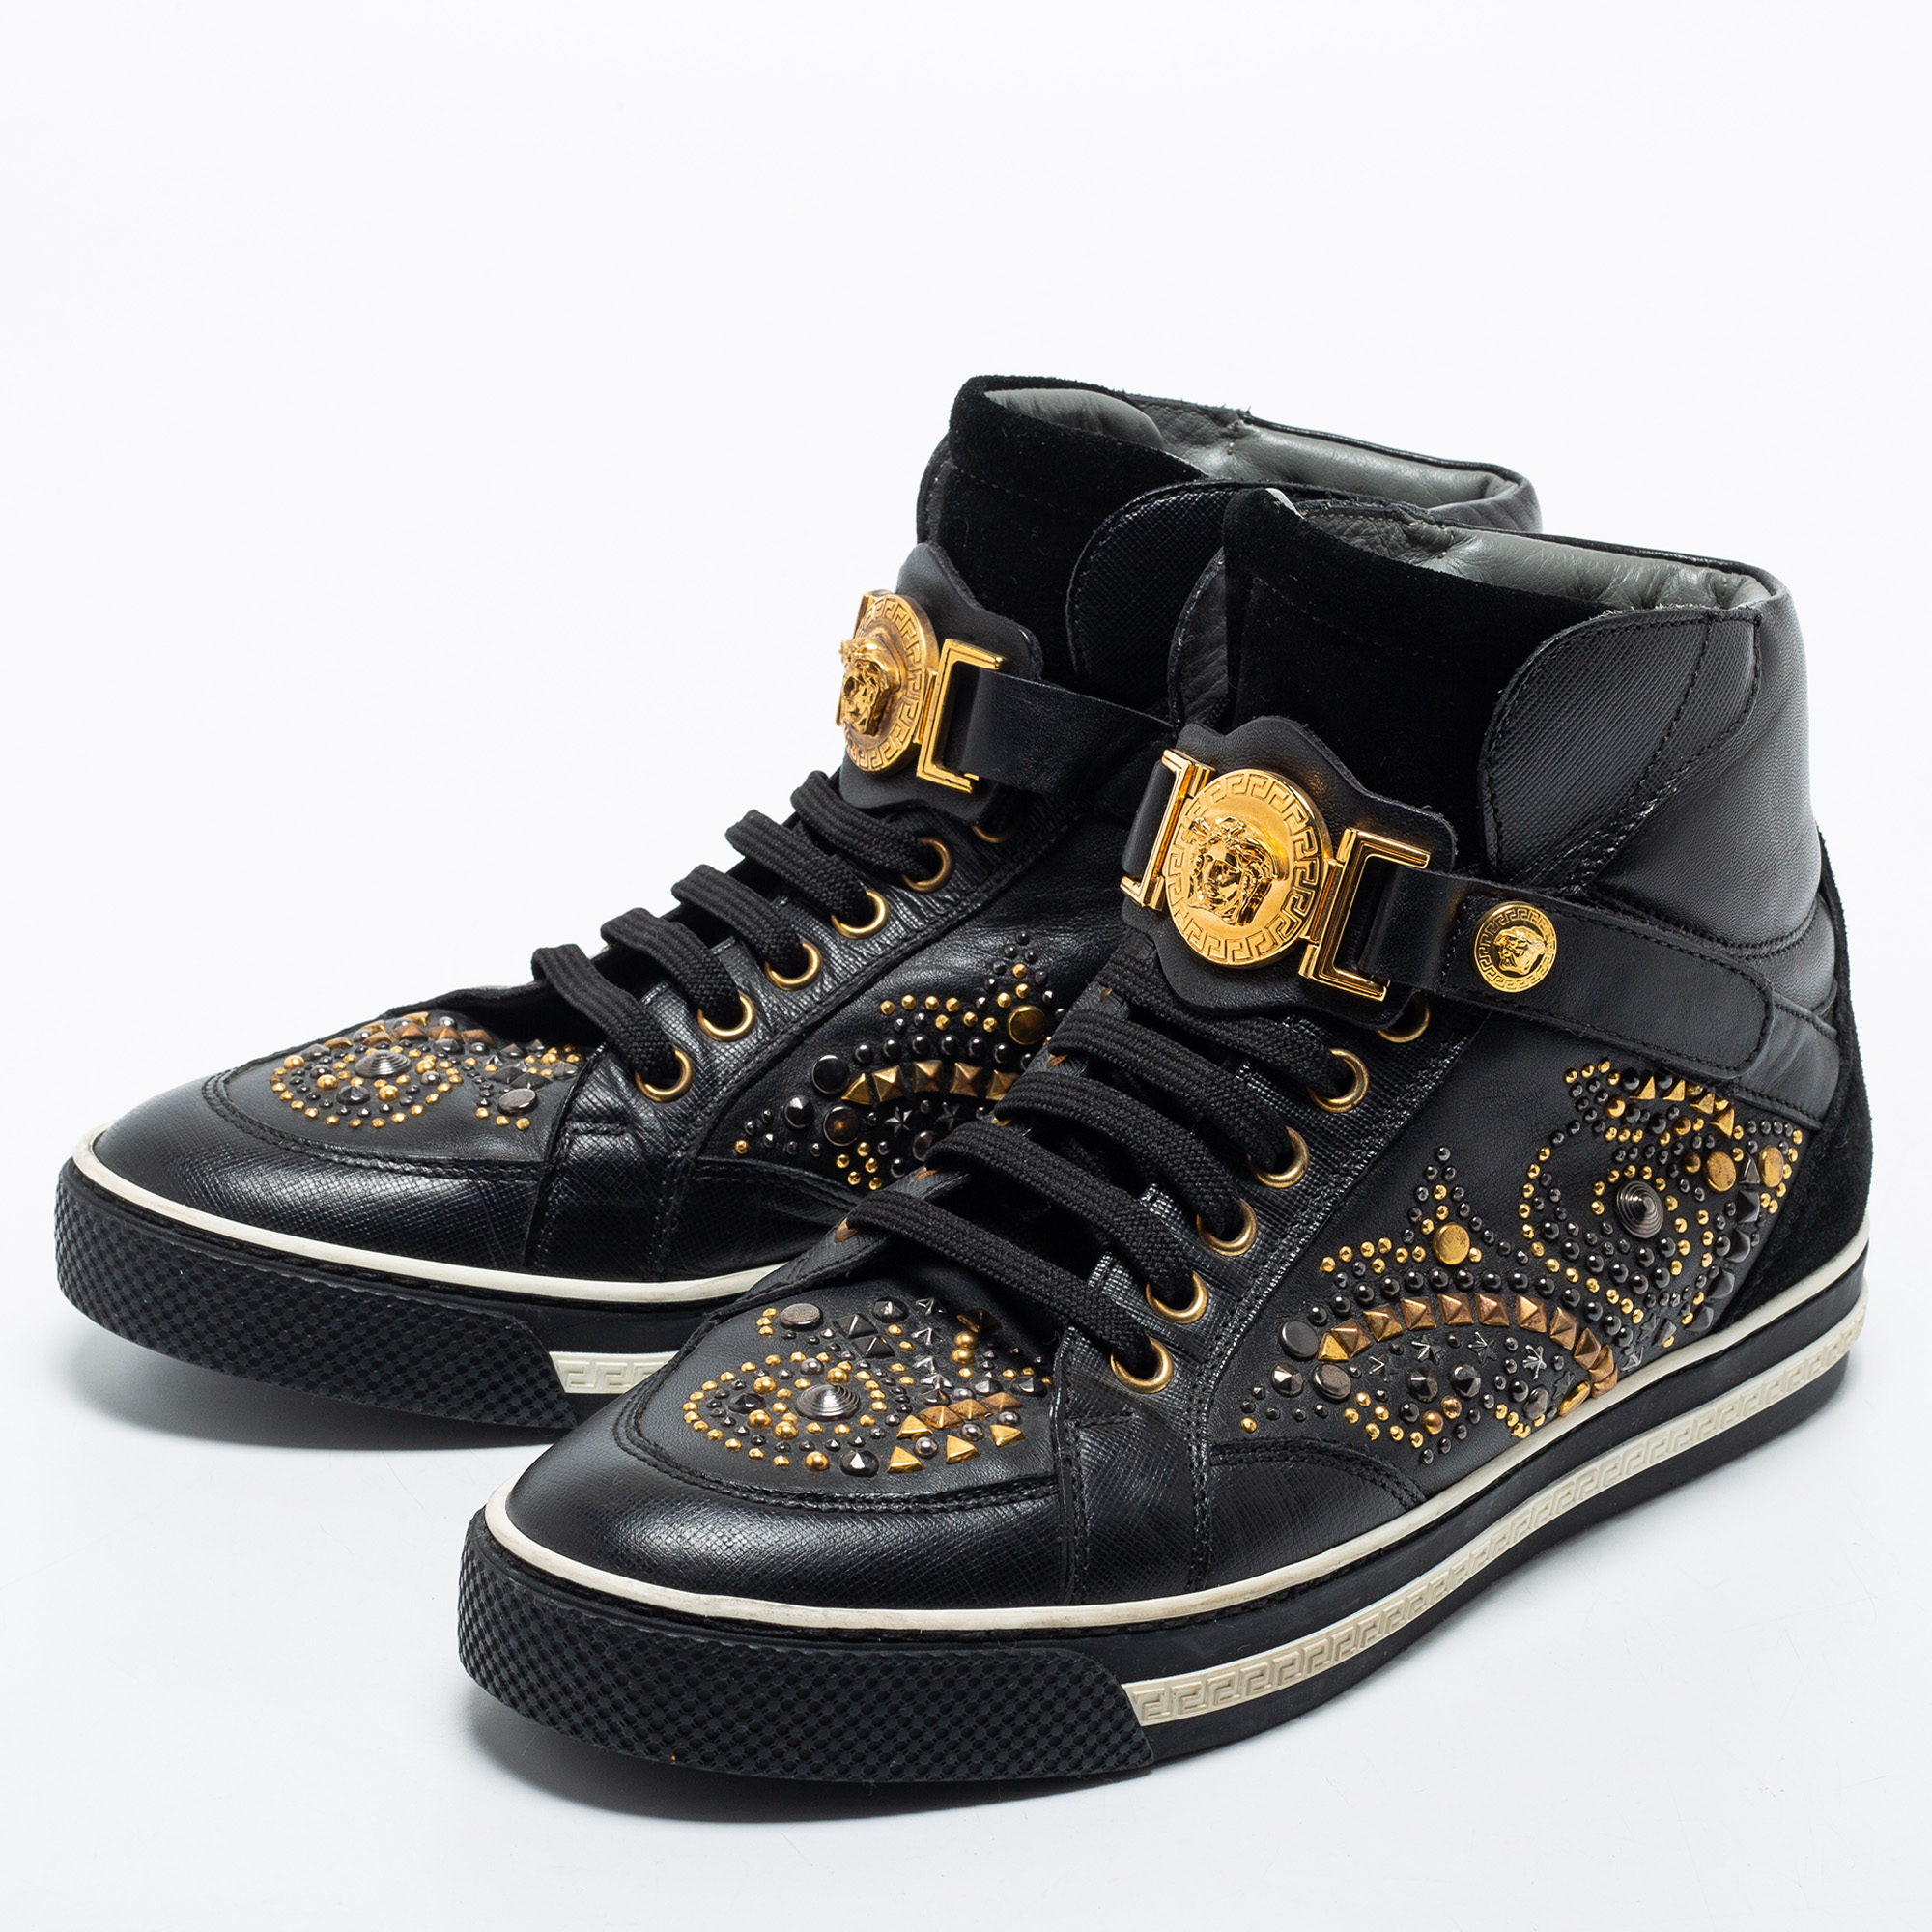 

Versace Black Studded Leather and Suede Medusa Buckle High Top Sneakers Size